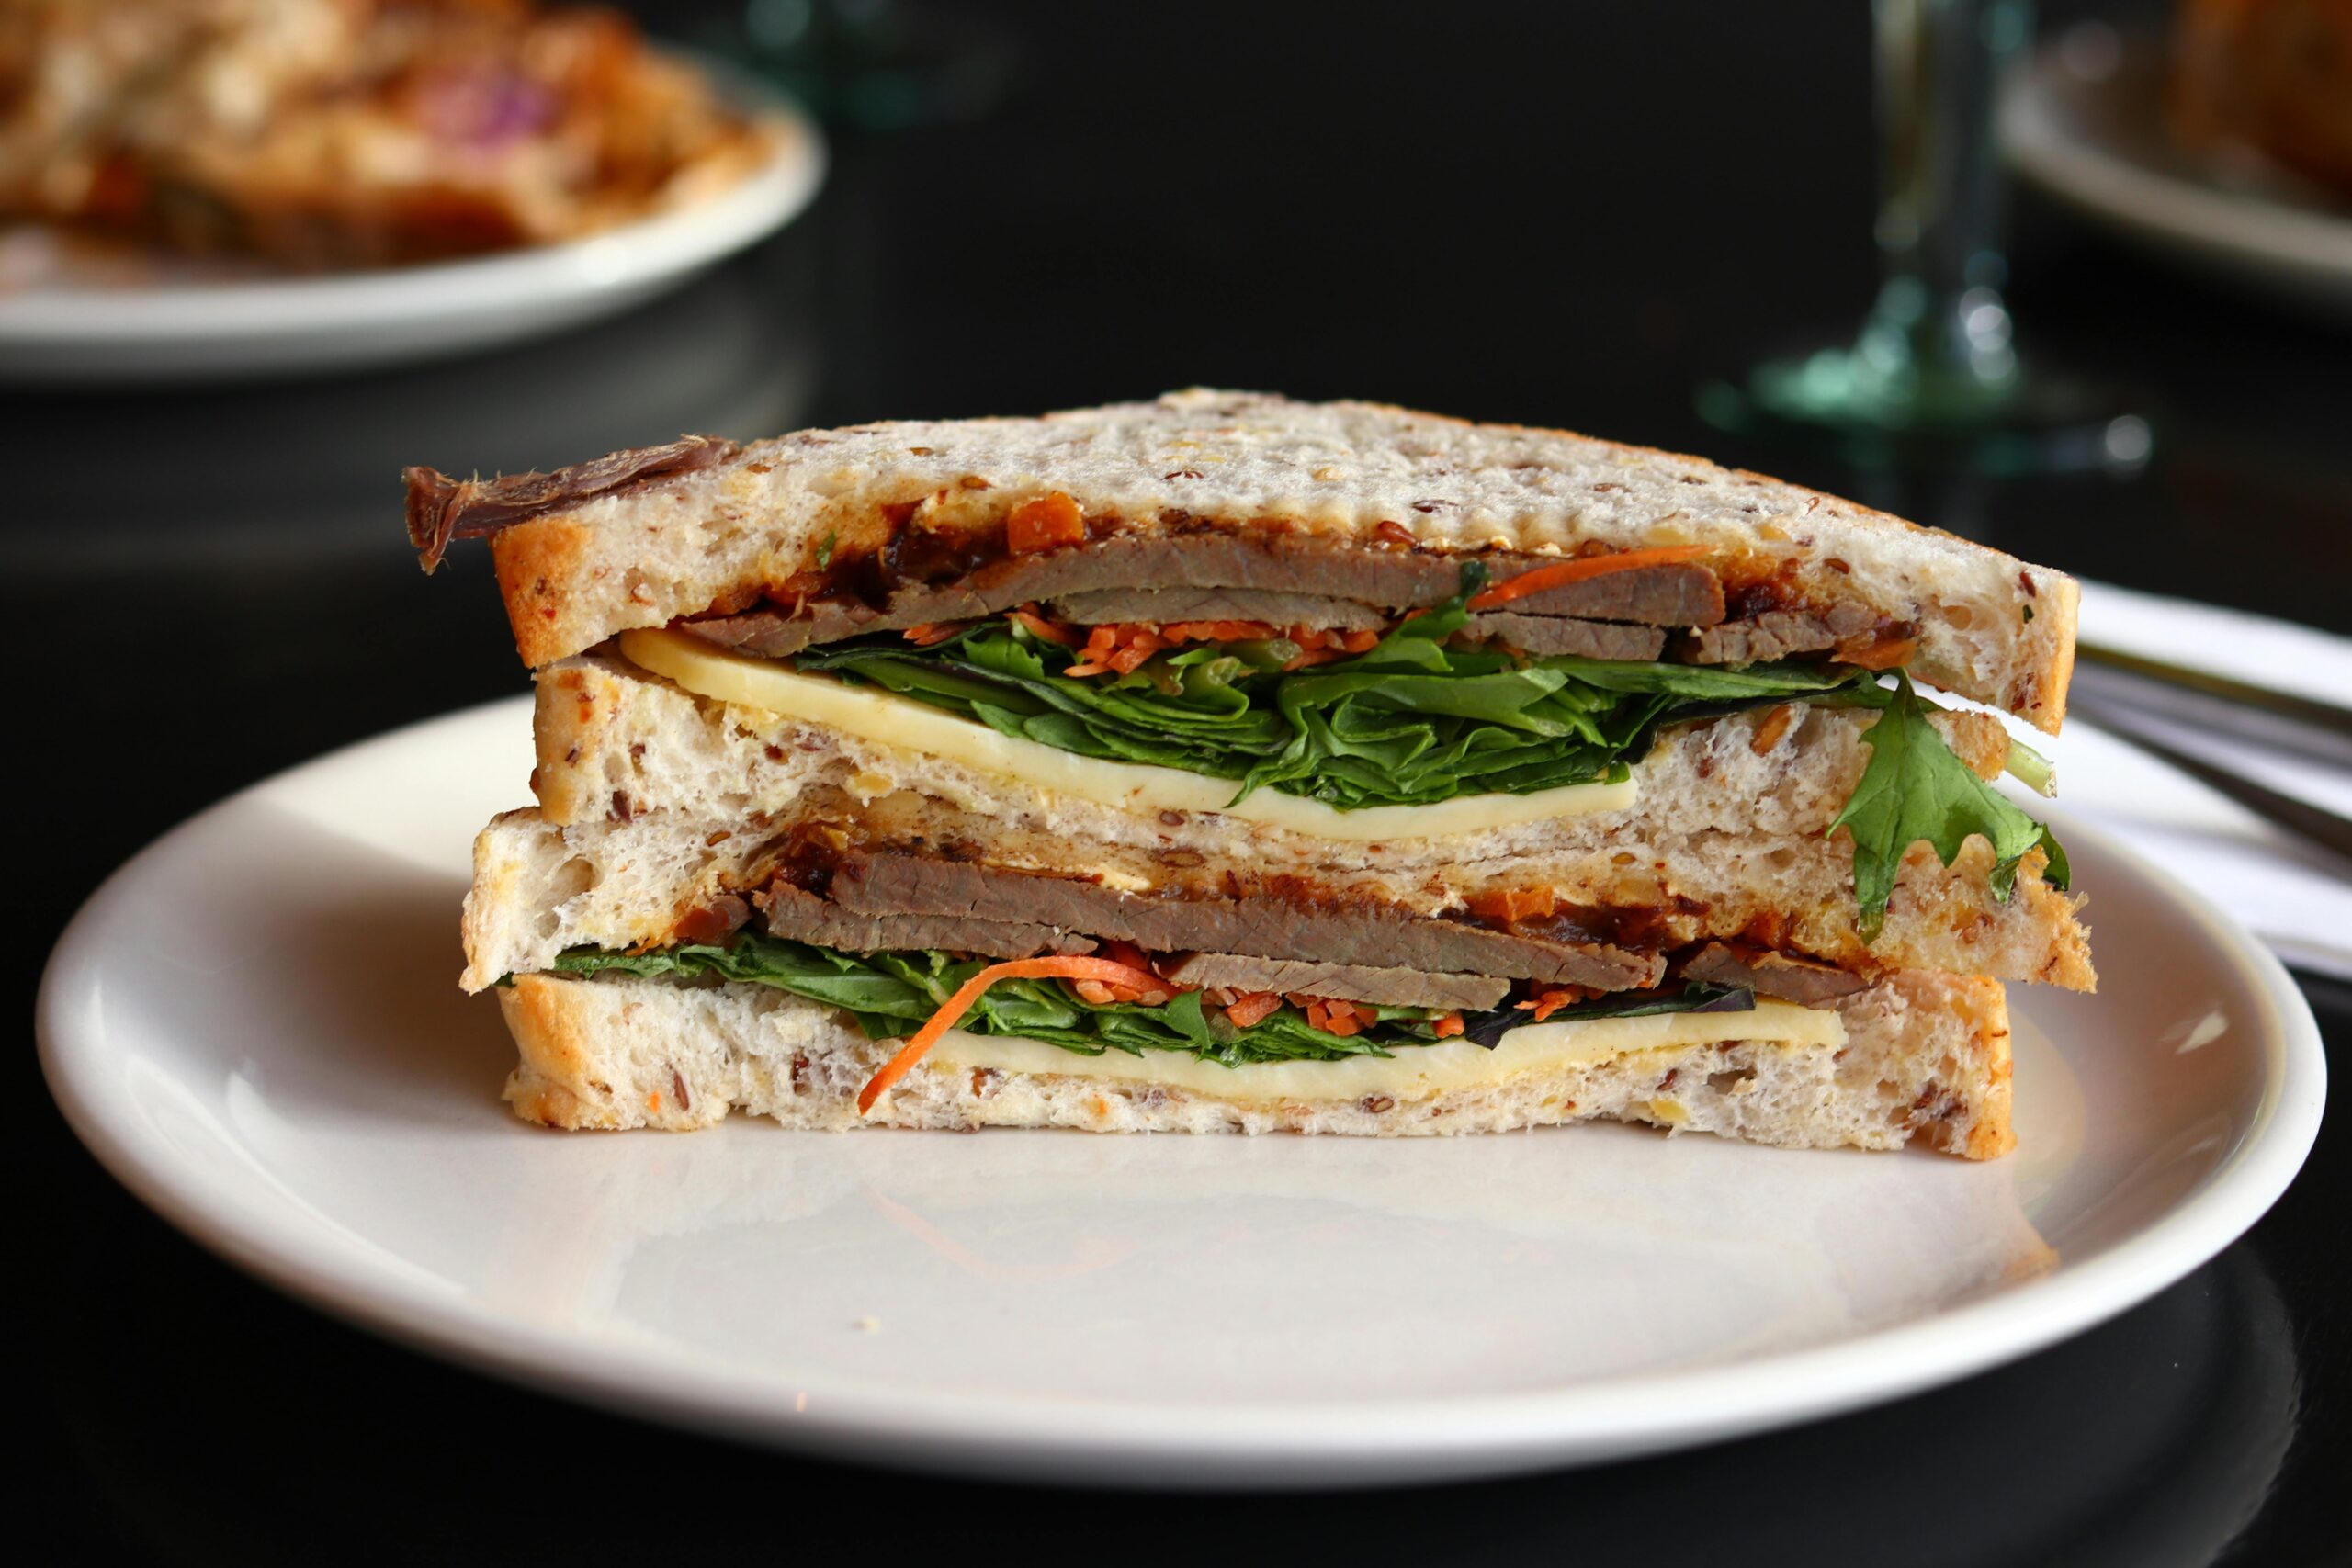 A close-up image of a sandwich with layers of turkey, cheese, spinach, and tomato on a white plate.